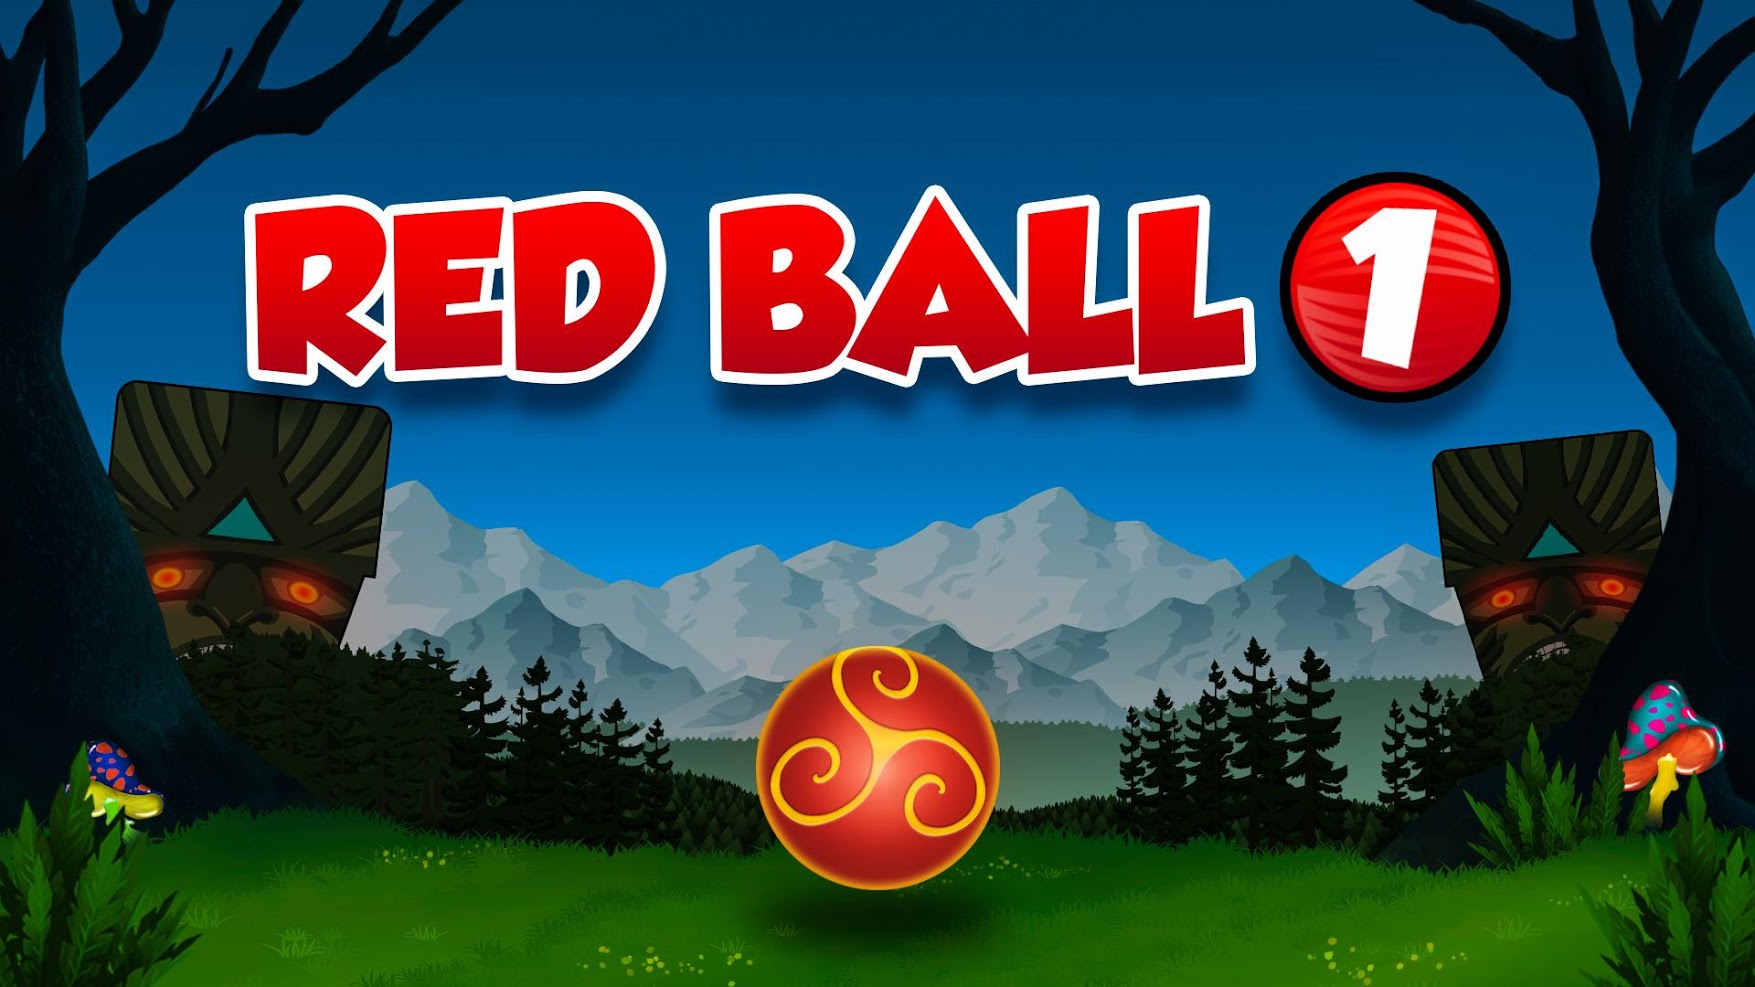 Download red balls. Ред бол 1. Red Ball 1 game. Красный шар 2. Red Ball аркада.